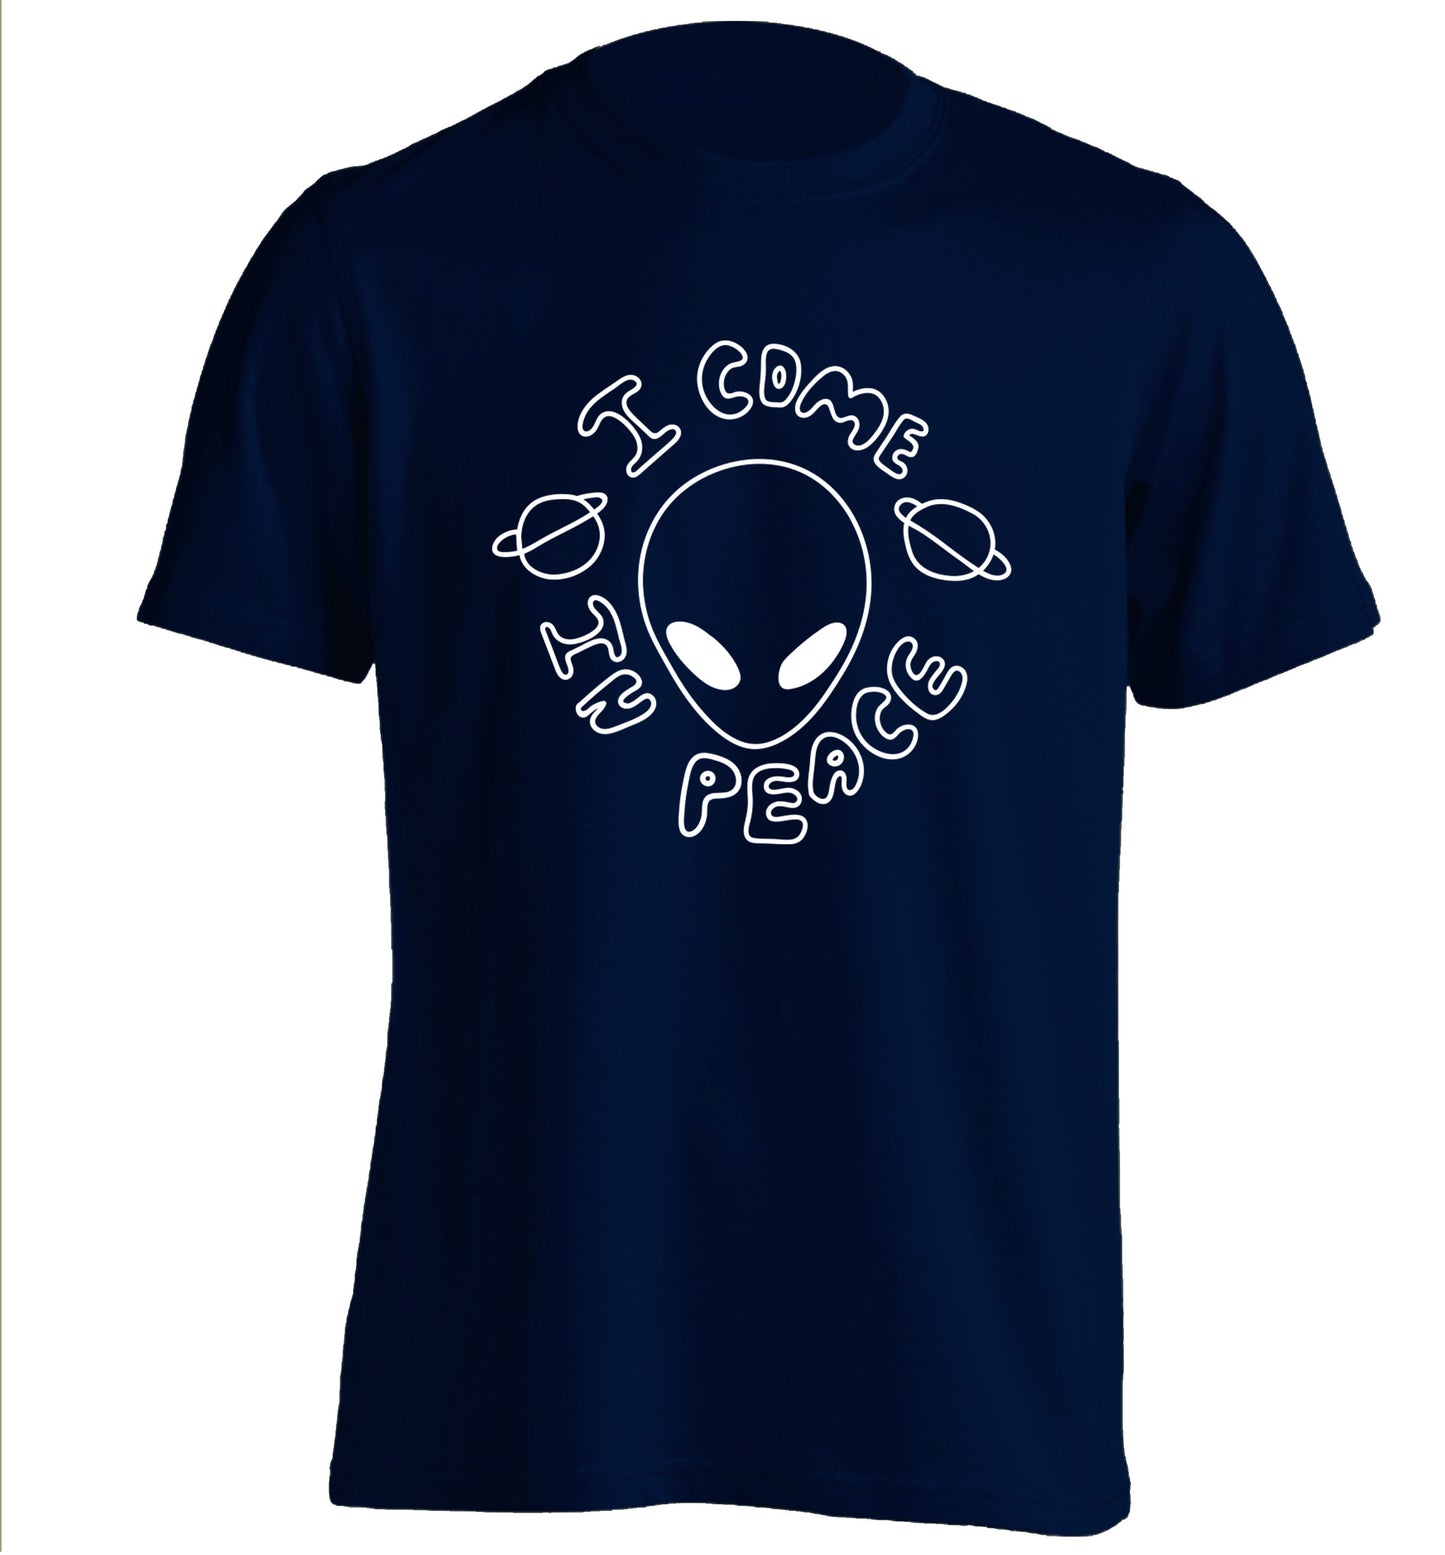 I come in peace adults unisex navy Tshirt 2XL